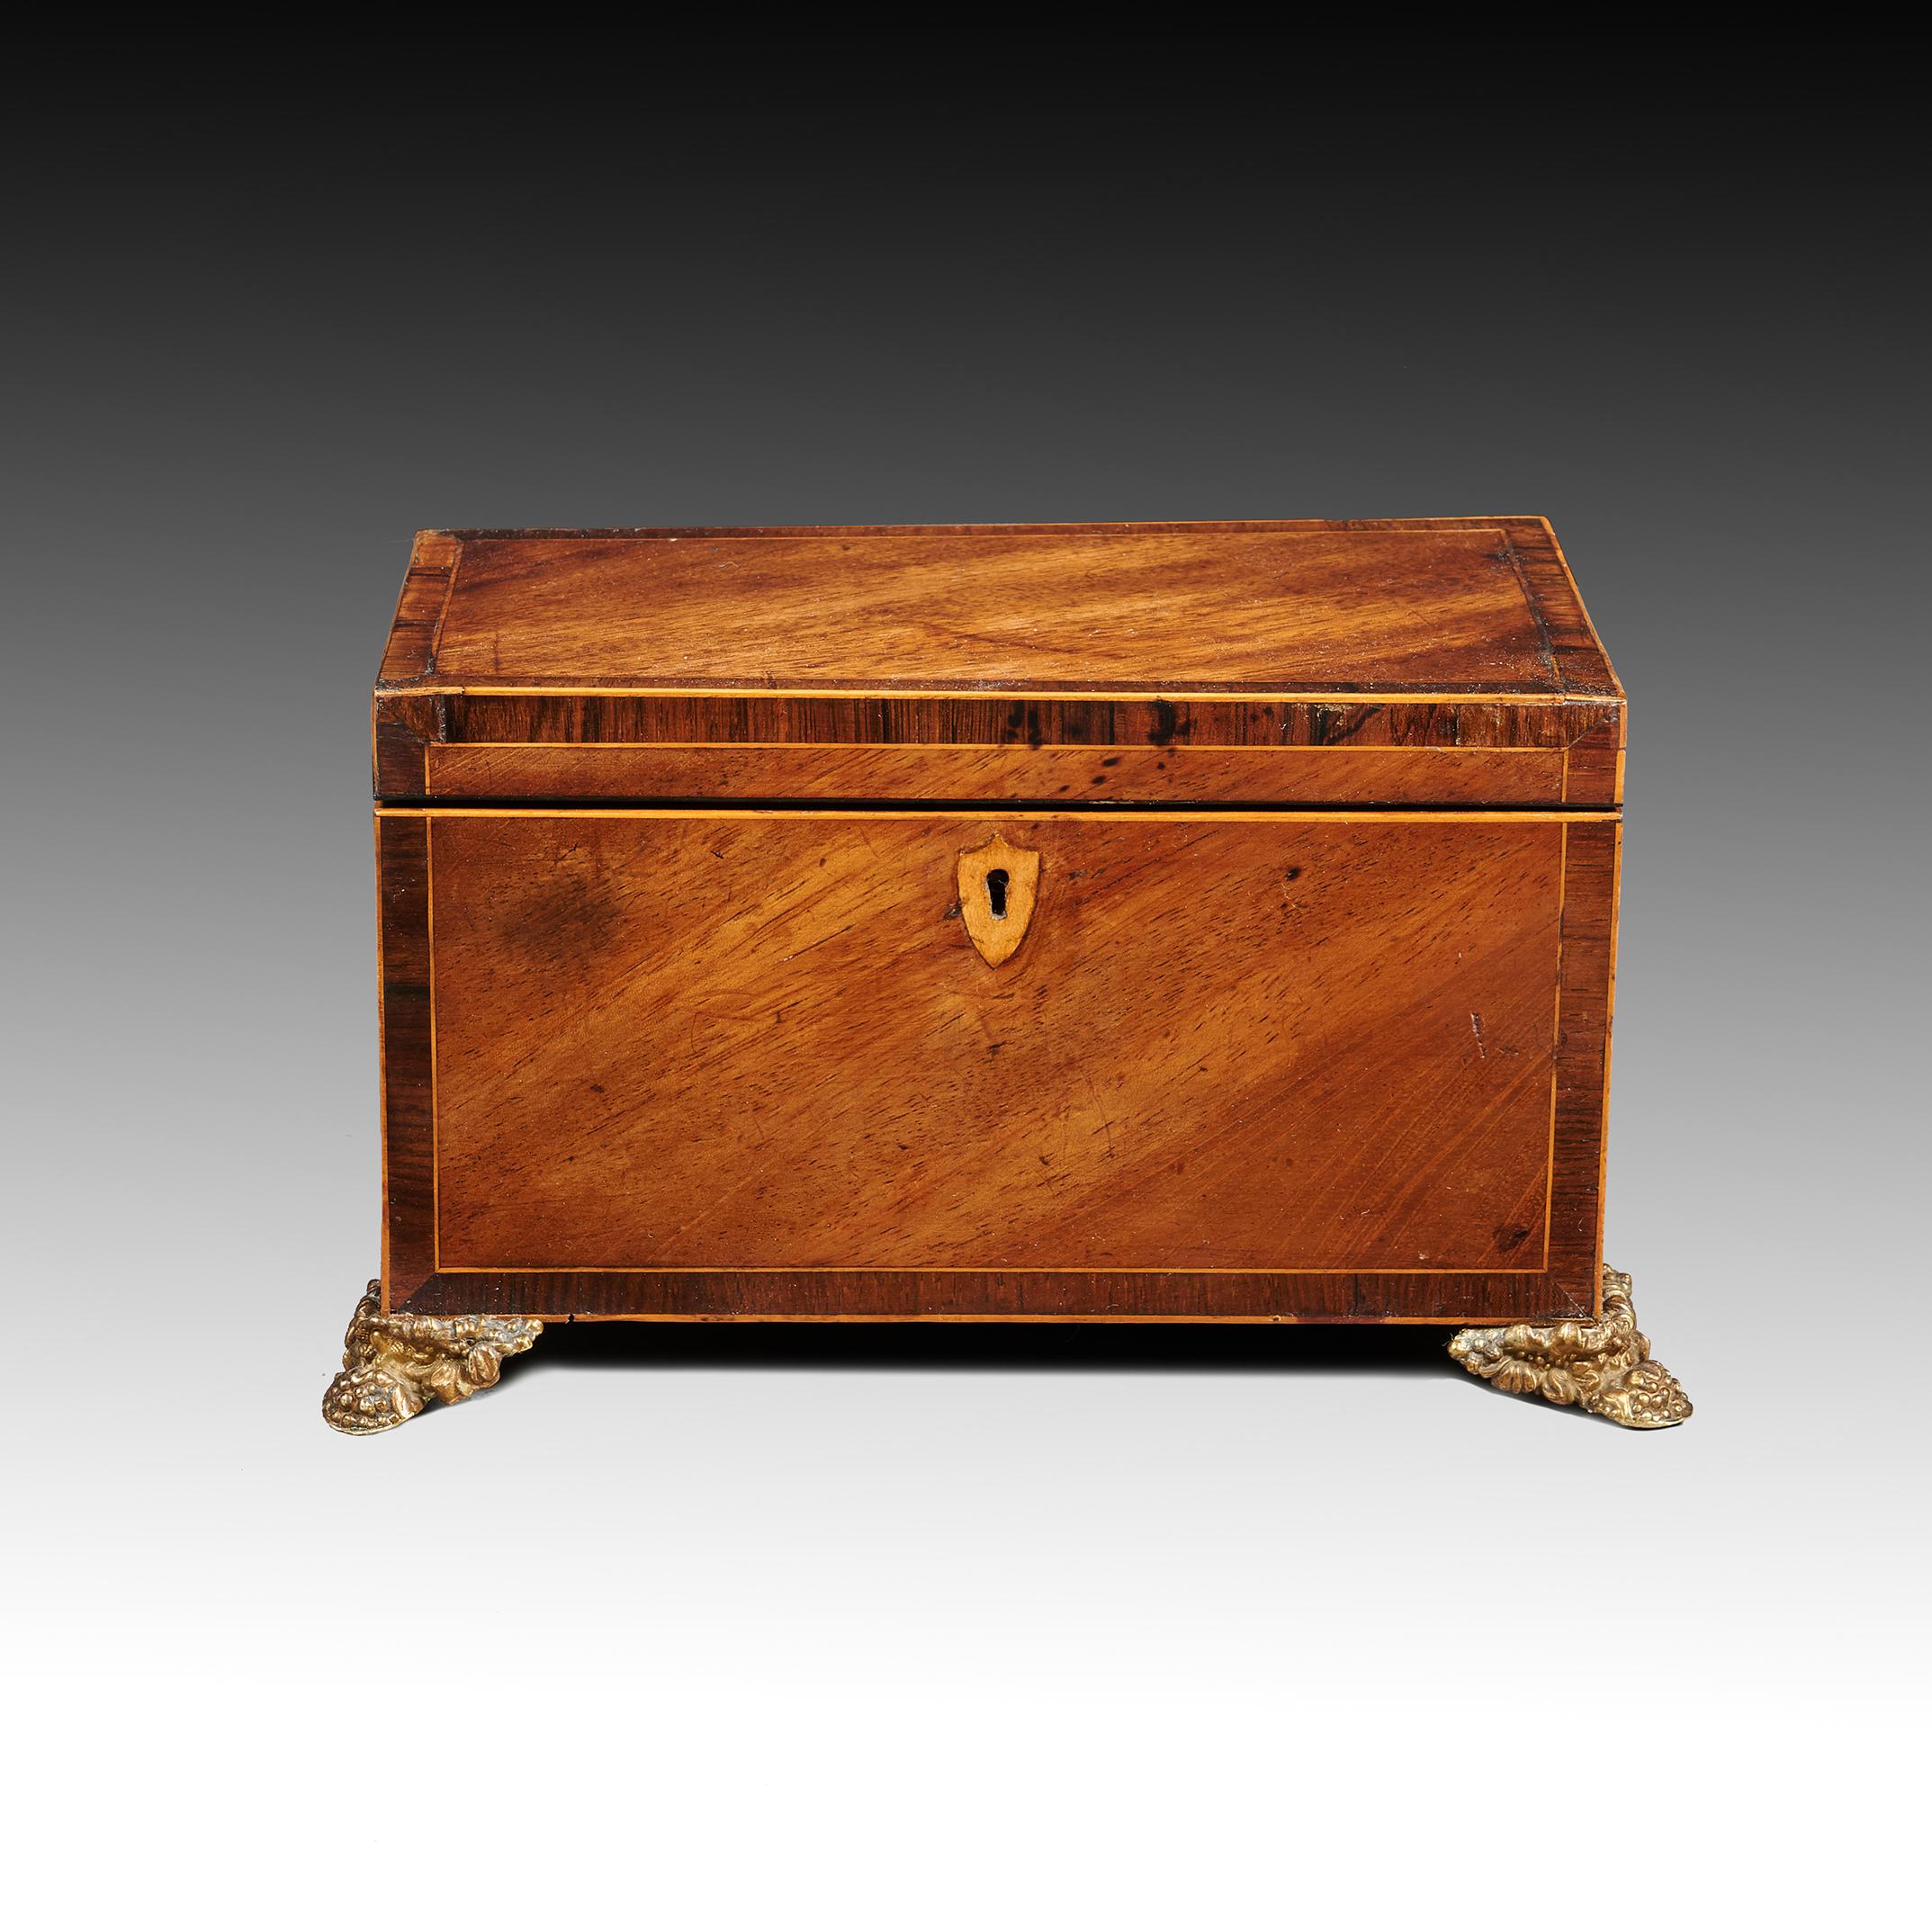 A neat George III mahogany and boxwood inlaid tea caddy raised on original brass feet

English circa 1800.


The rectangular lift up top opening to reveal a fitted interior of two lidded compartments.
The top has a slight bow which has been